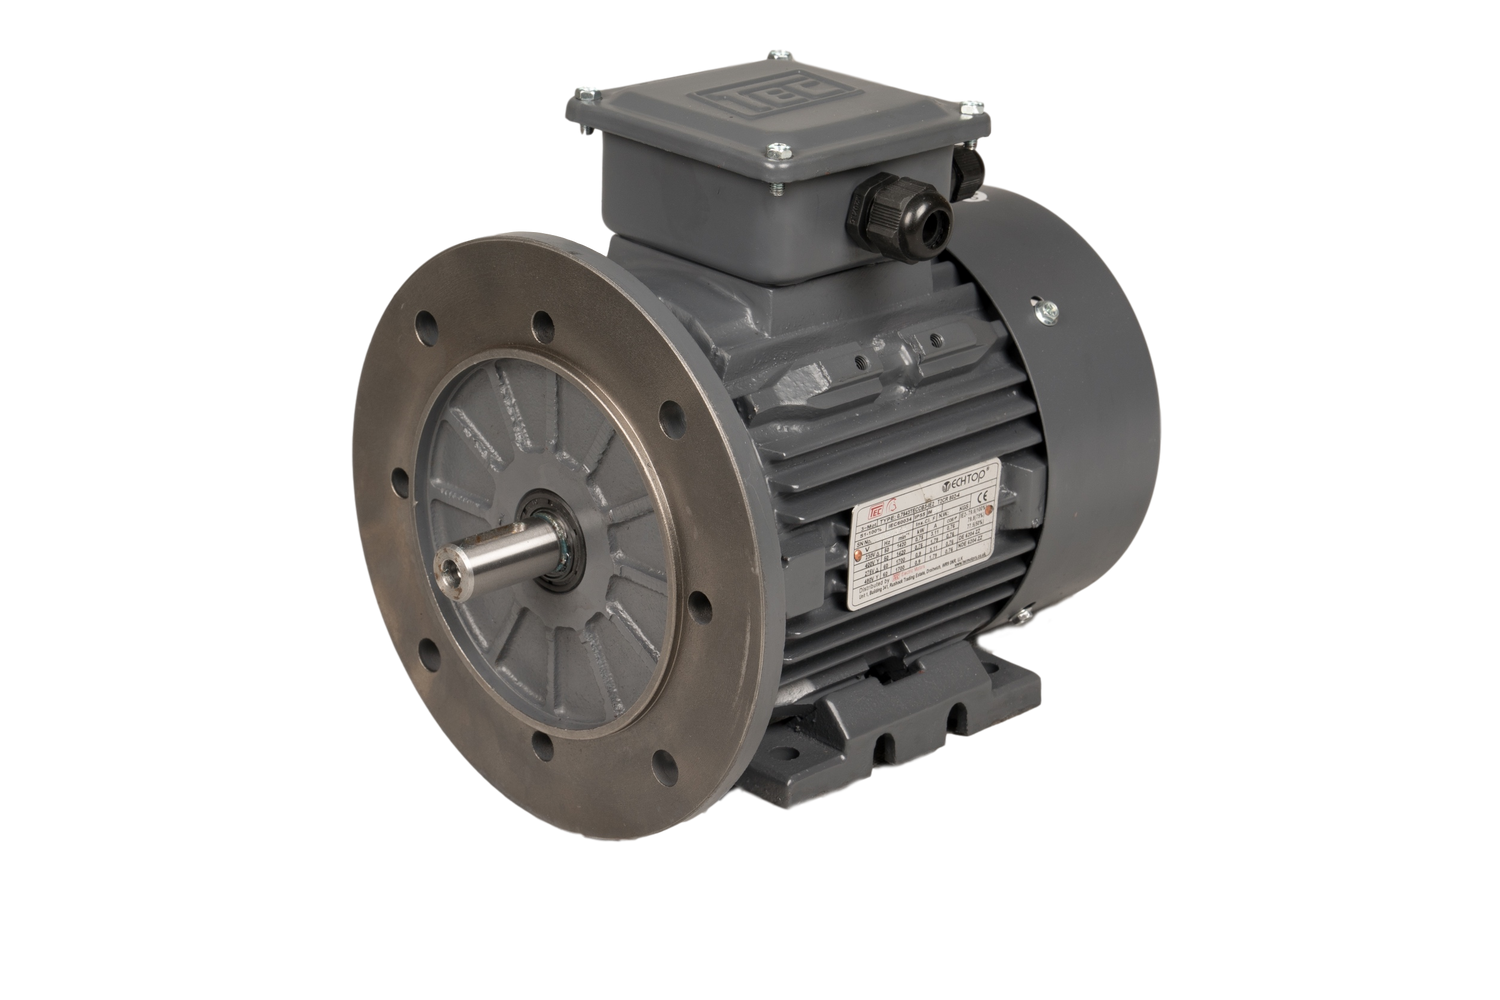 TEC-Three-Phase-Cast-Iron-Electric-Motor-30kw-4-Pole-Flange-Mounted-B5-IE2